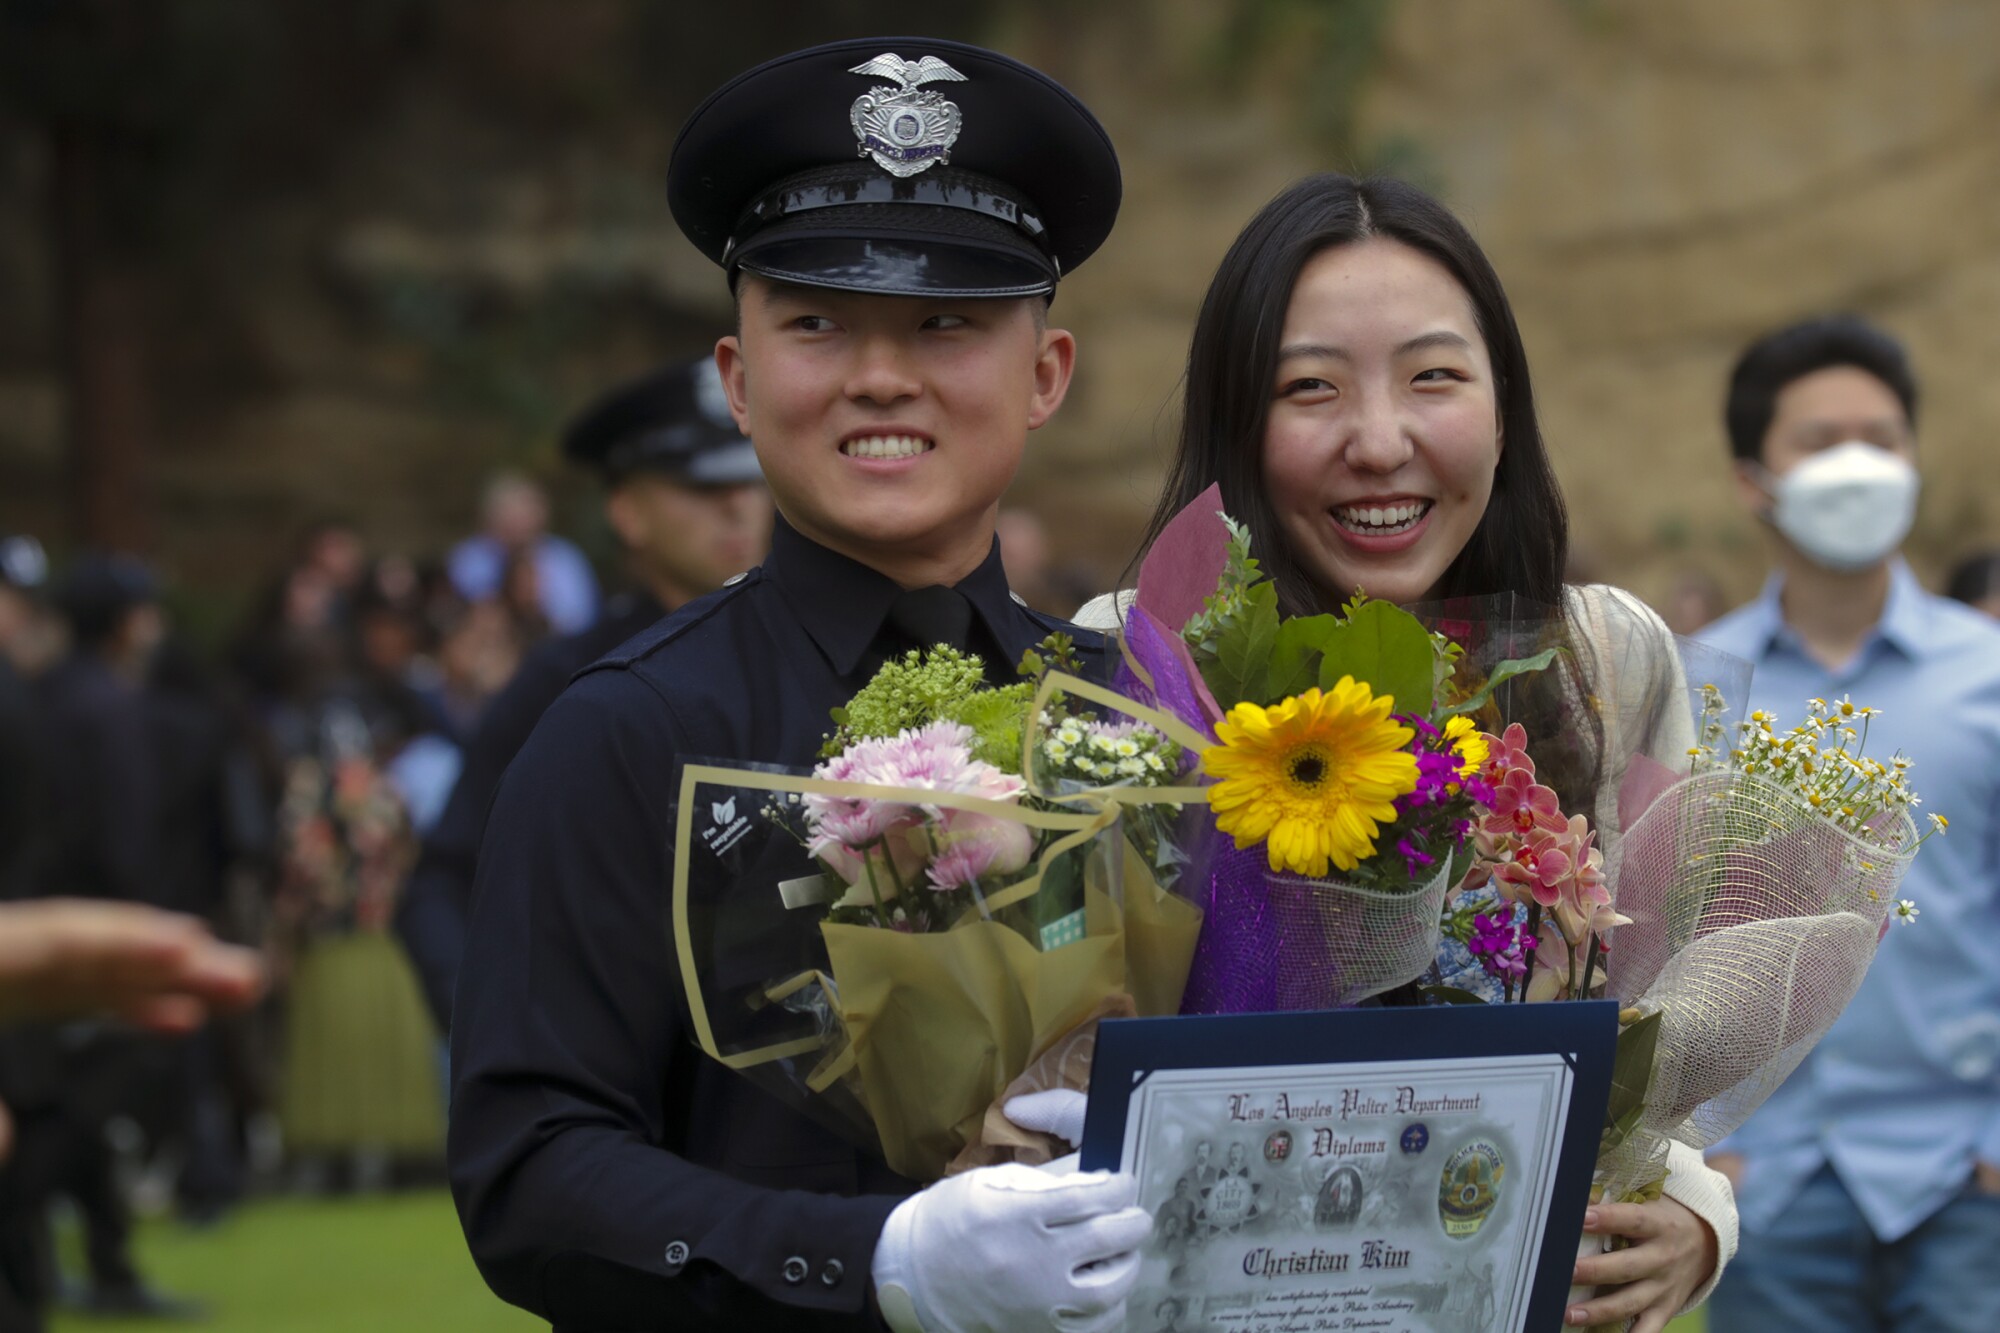 New graduate police officer Christian Kim, left, and his girlfriend Jennifer Yoon after the graduation ceremony.